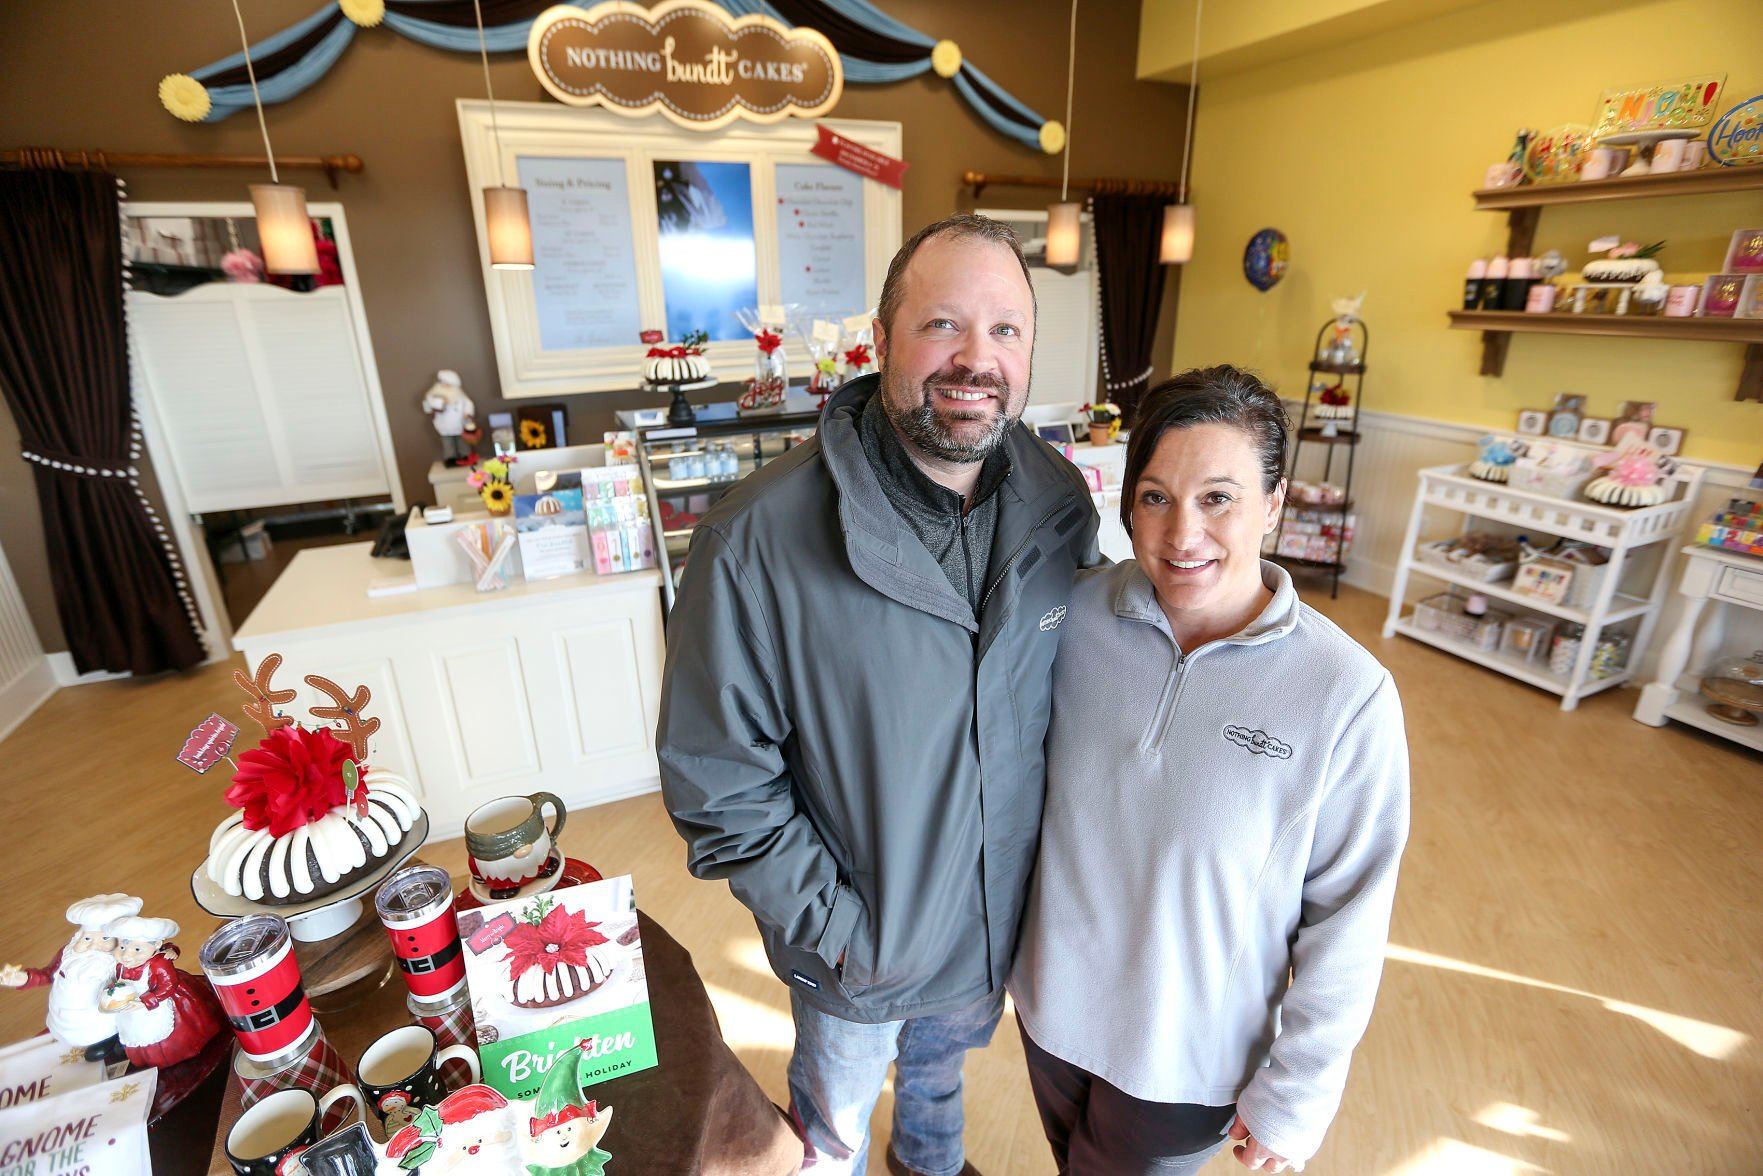 Owners Chris and Danielle Stoll recently opened Nothing Bundt Cakes at 190 John F. Kennedy Road.    PHOTO CREDIT: Dave Kettering